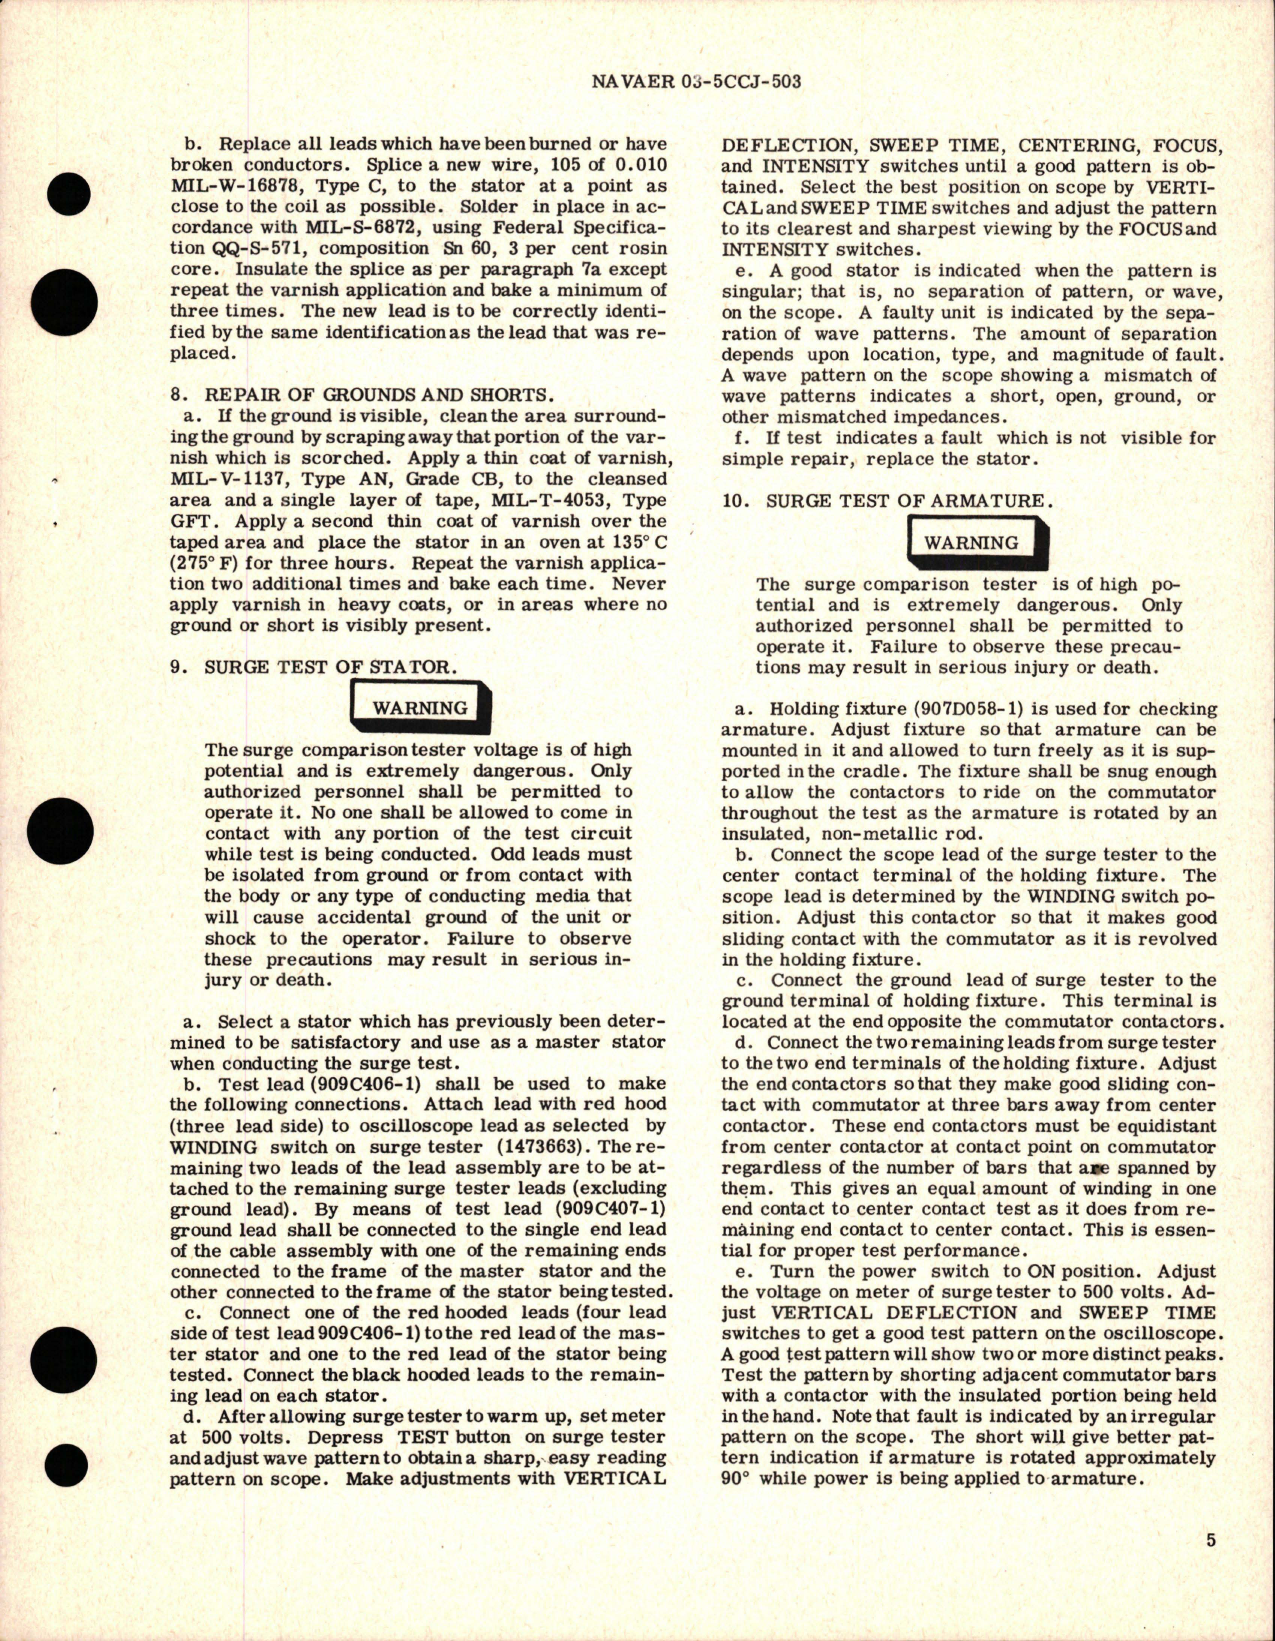 Sample page 5 from AirCorps Library document: Overhaul Instructions with Parts Breakdown for D-C Motor - Part A35A8864